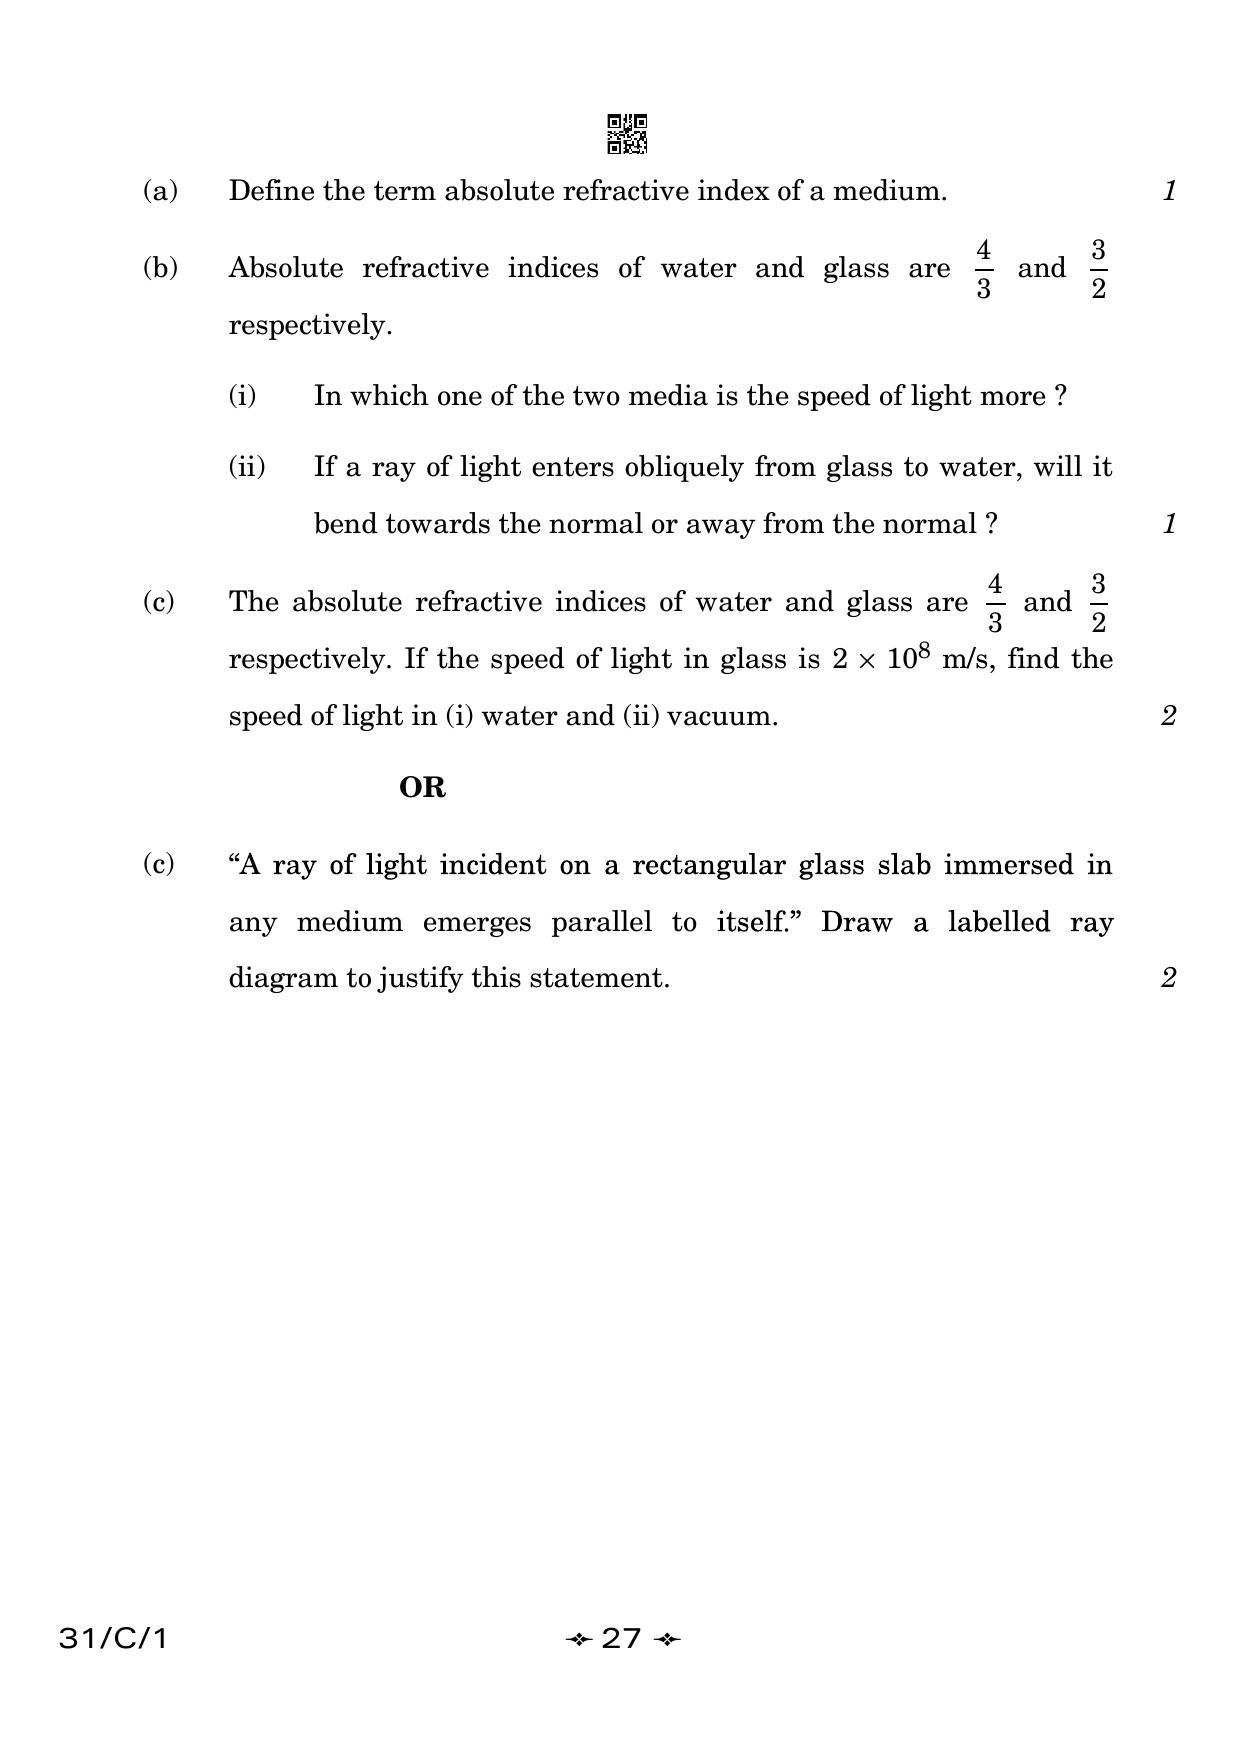 CBSE Class 10 31-1 Science 2023 (Compartment) Question Paper - Page 27